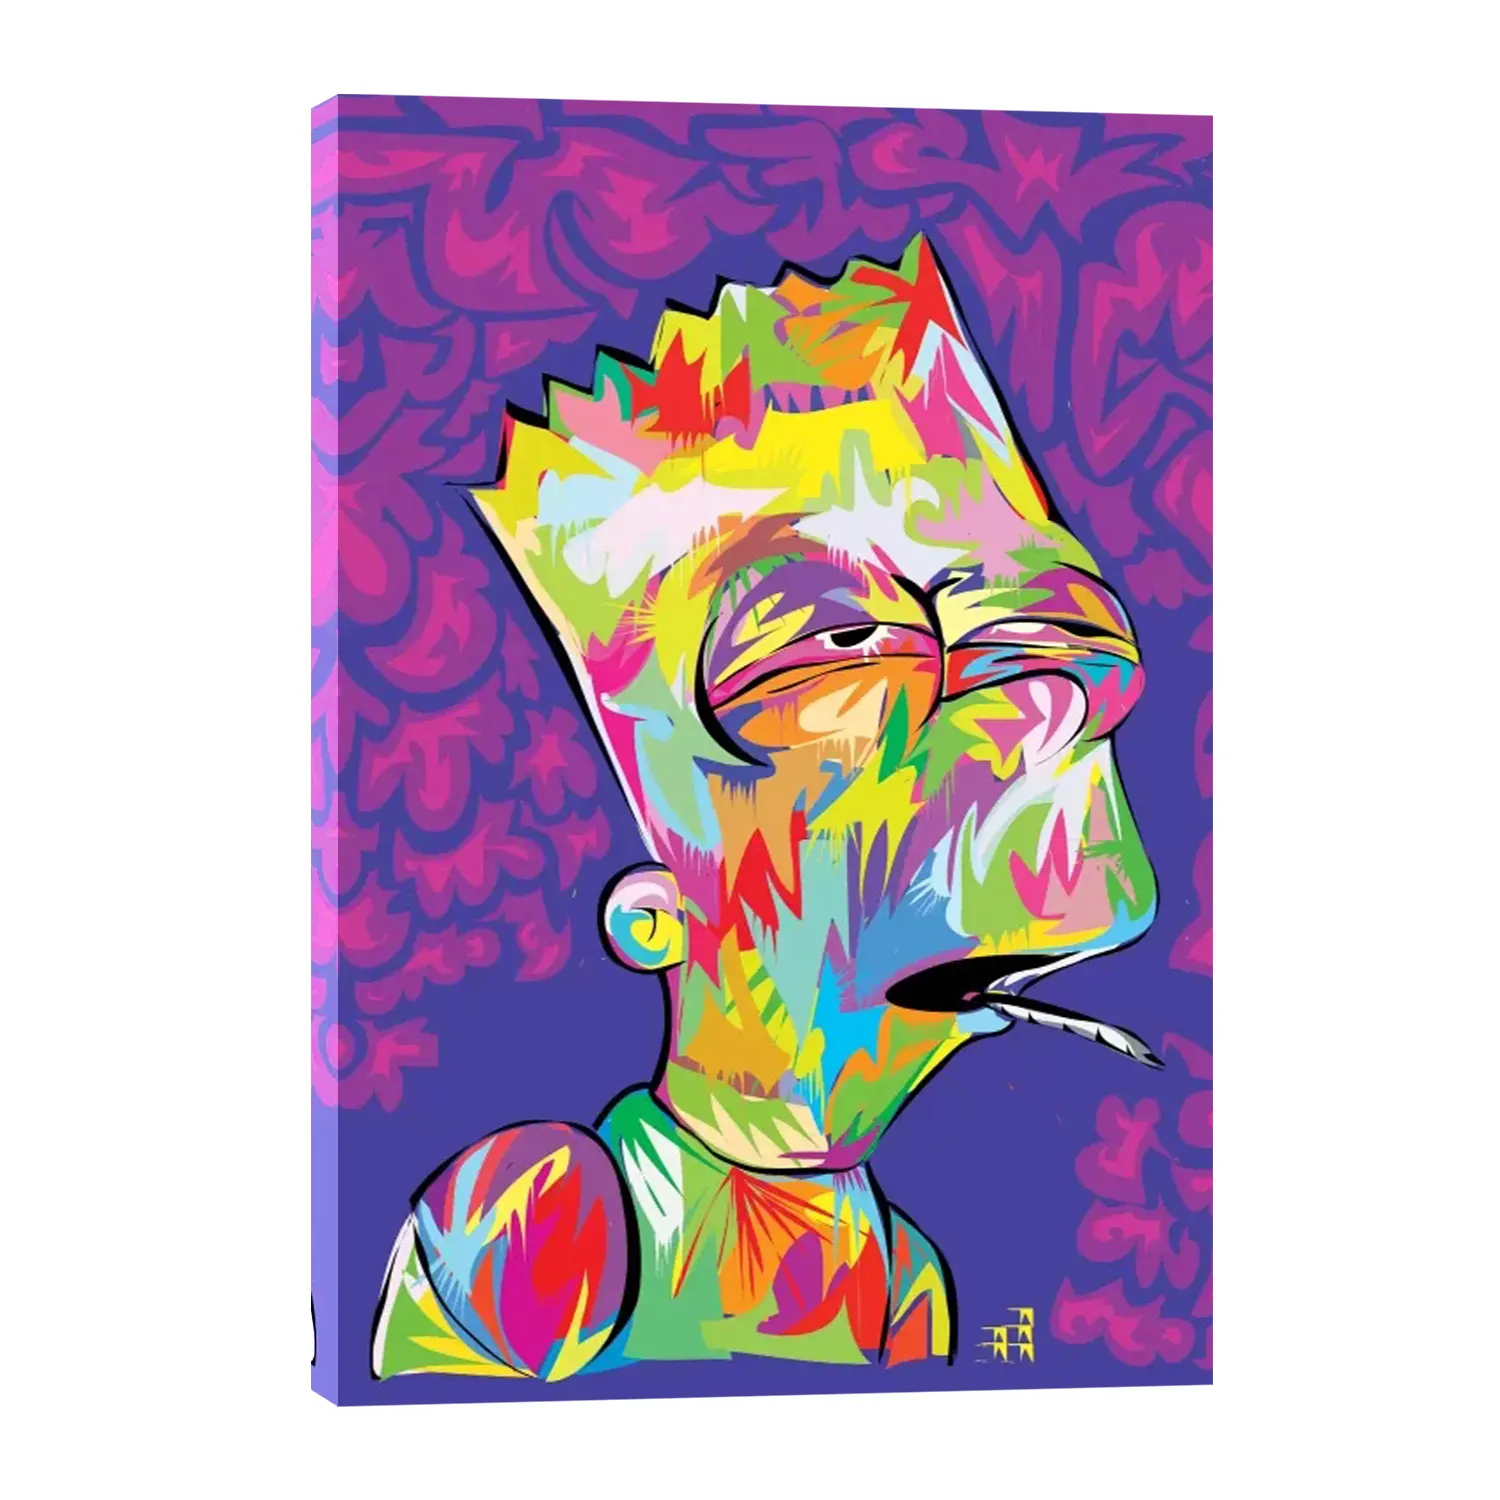 Simpson High Abstract Graffiti Pop Poster Decorations for Home Living Bedroom Wall Art Tableau Pictures Prints Canvas Paintings